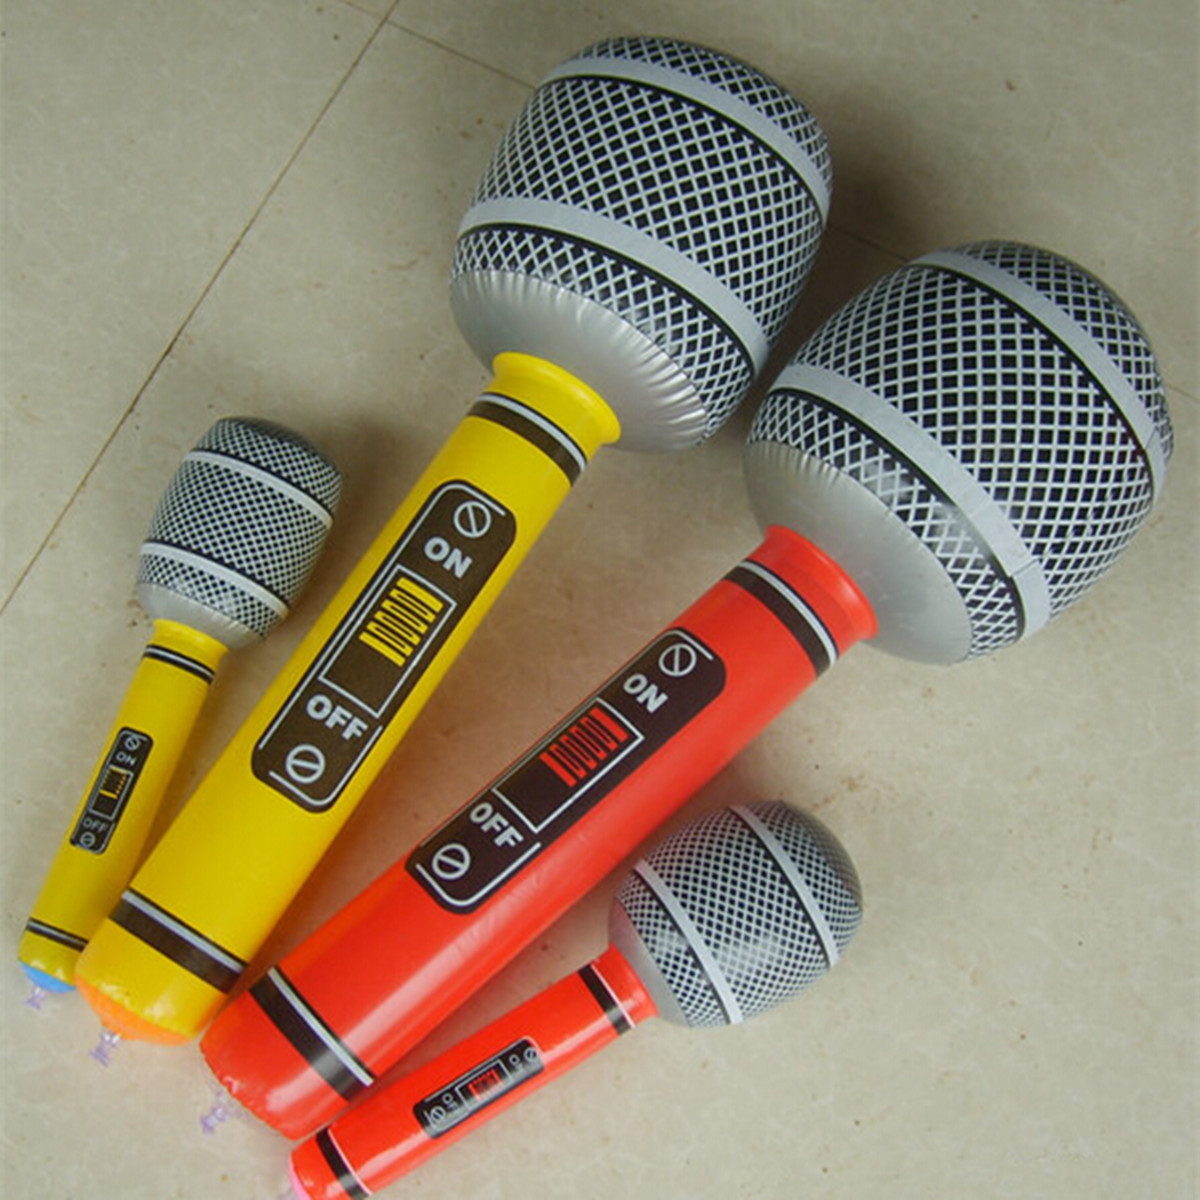 2-Sizes-Inflatable-Air-Microphone-Kids-Children-Toy-Blow-Up-Party-Fancy-Karaoke-1008710